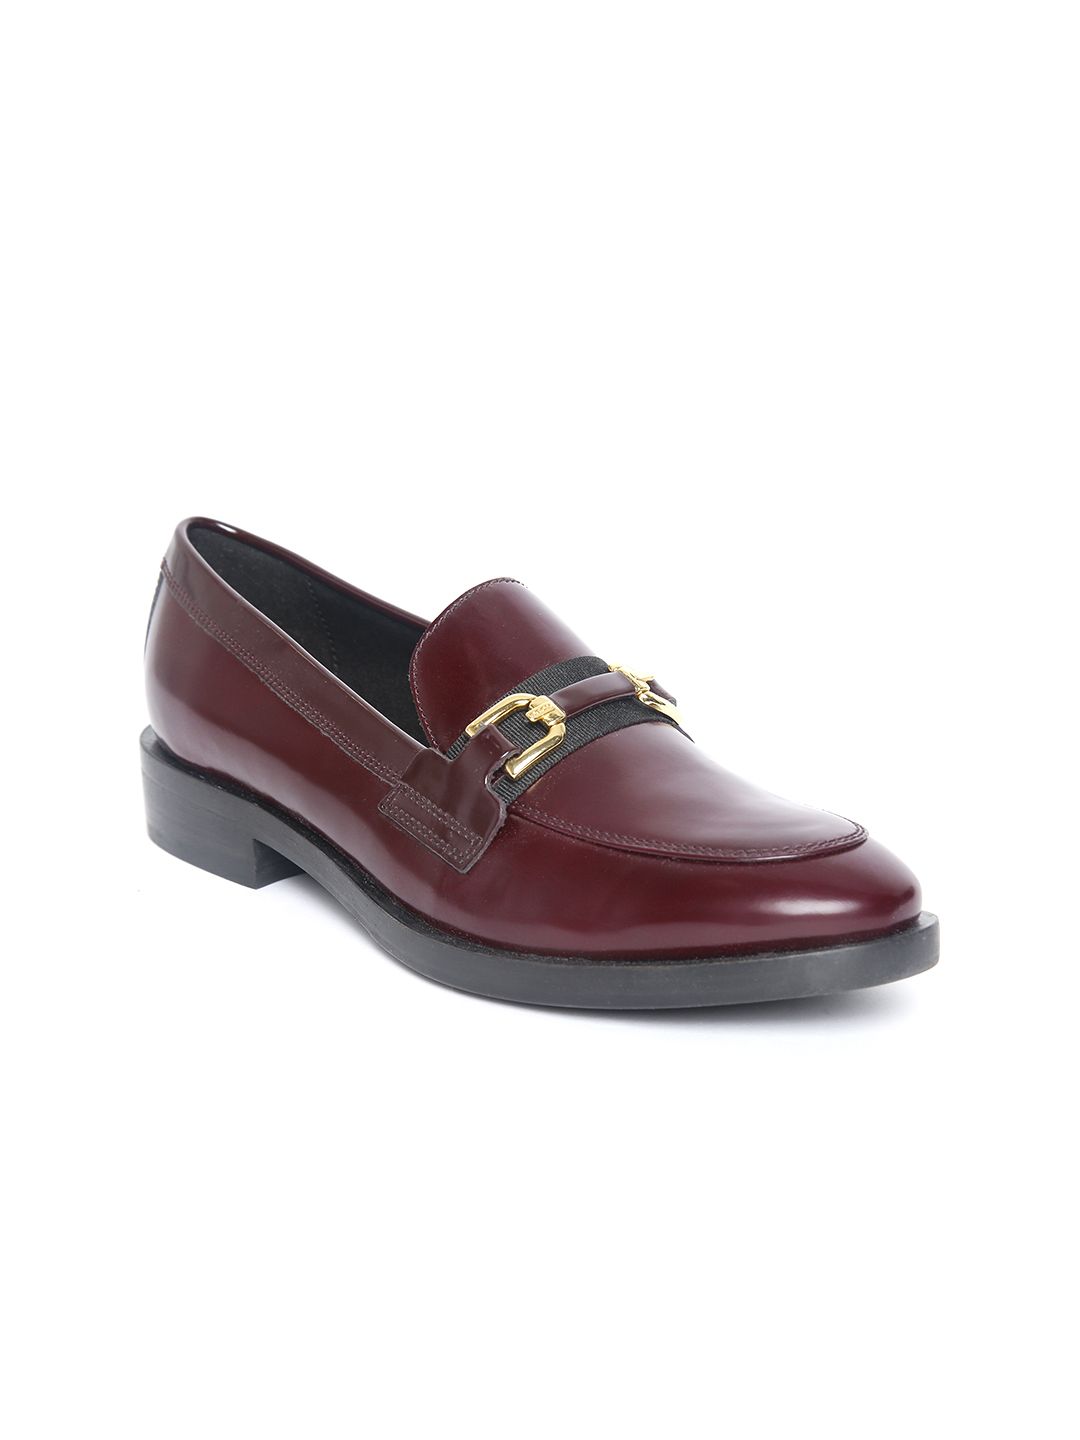 Geox Women Burgundy Solid Leather Loafers Price in India